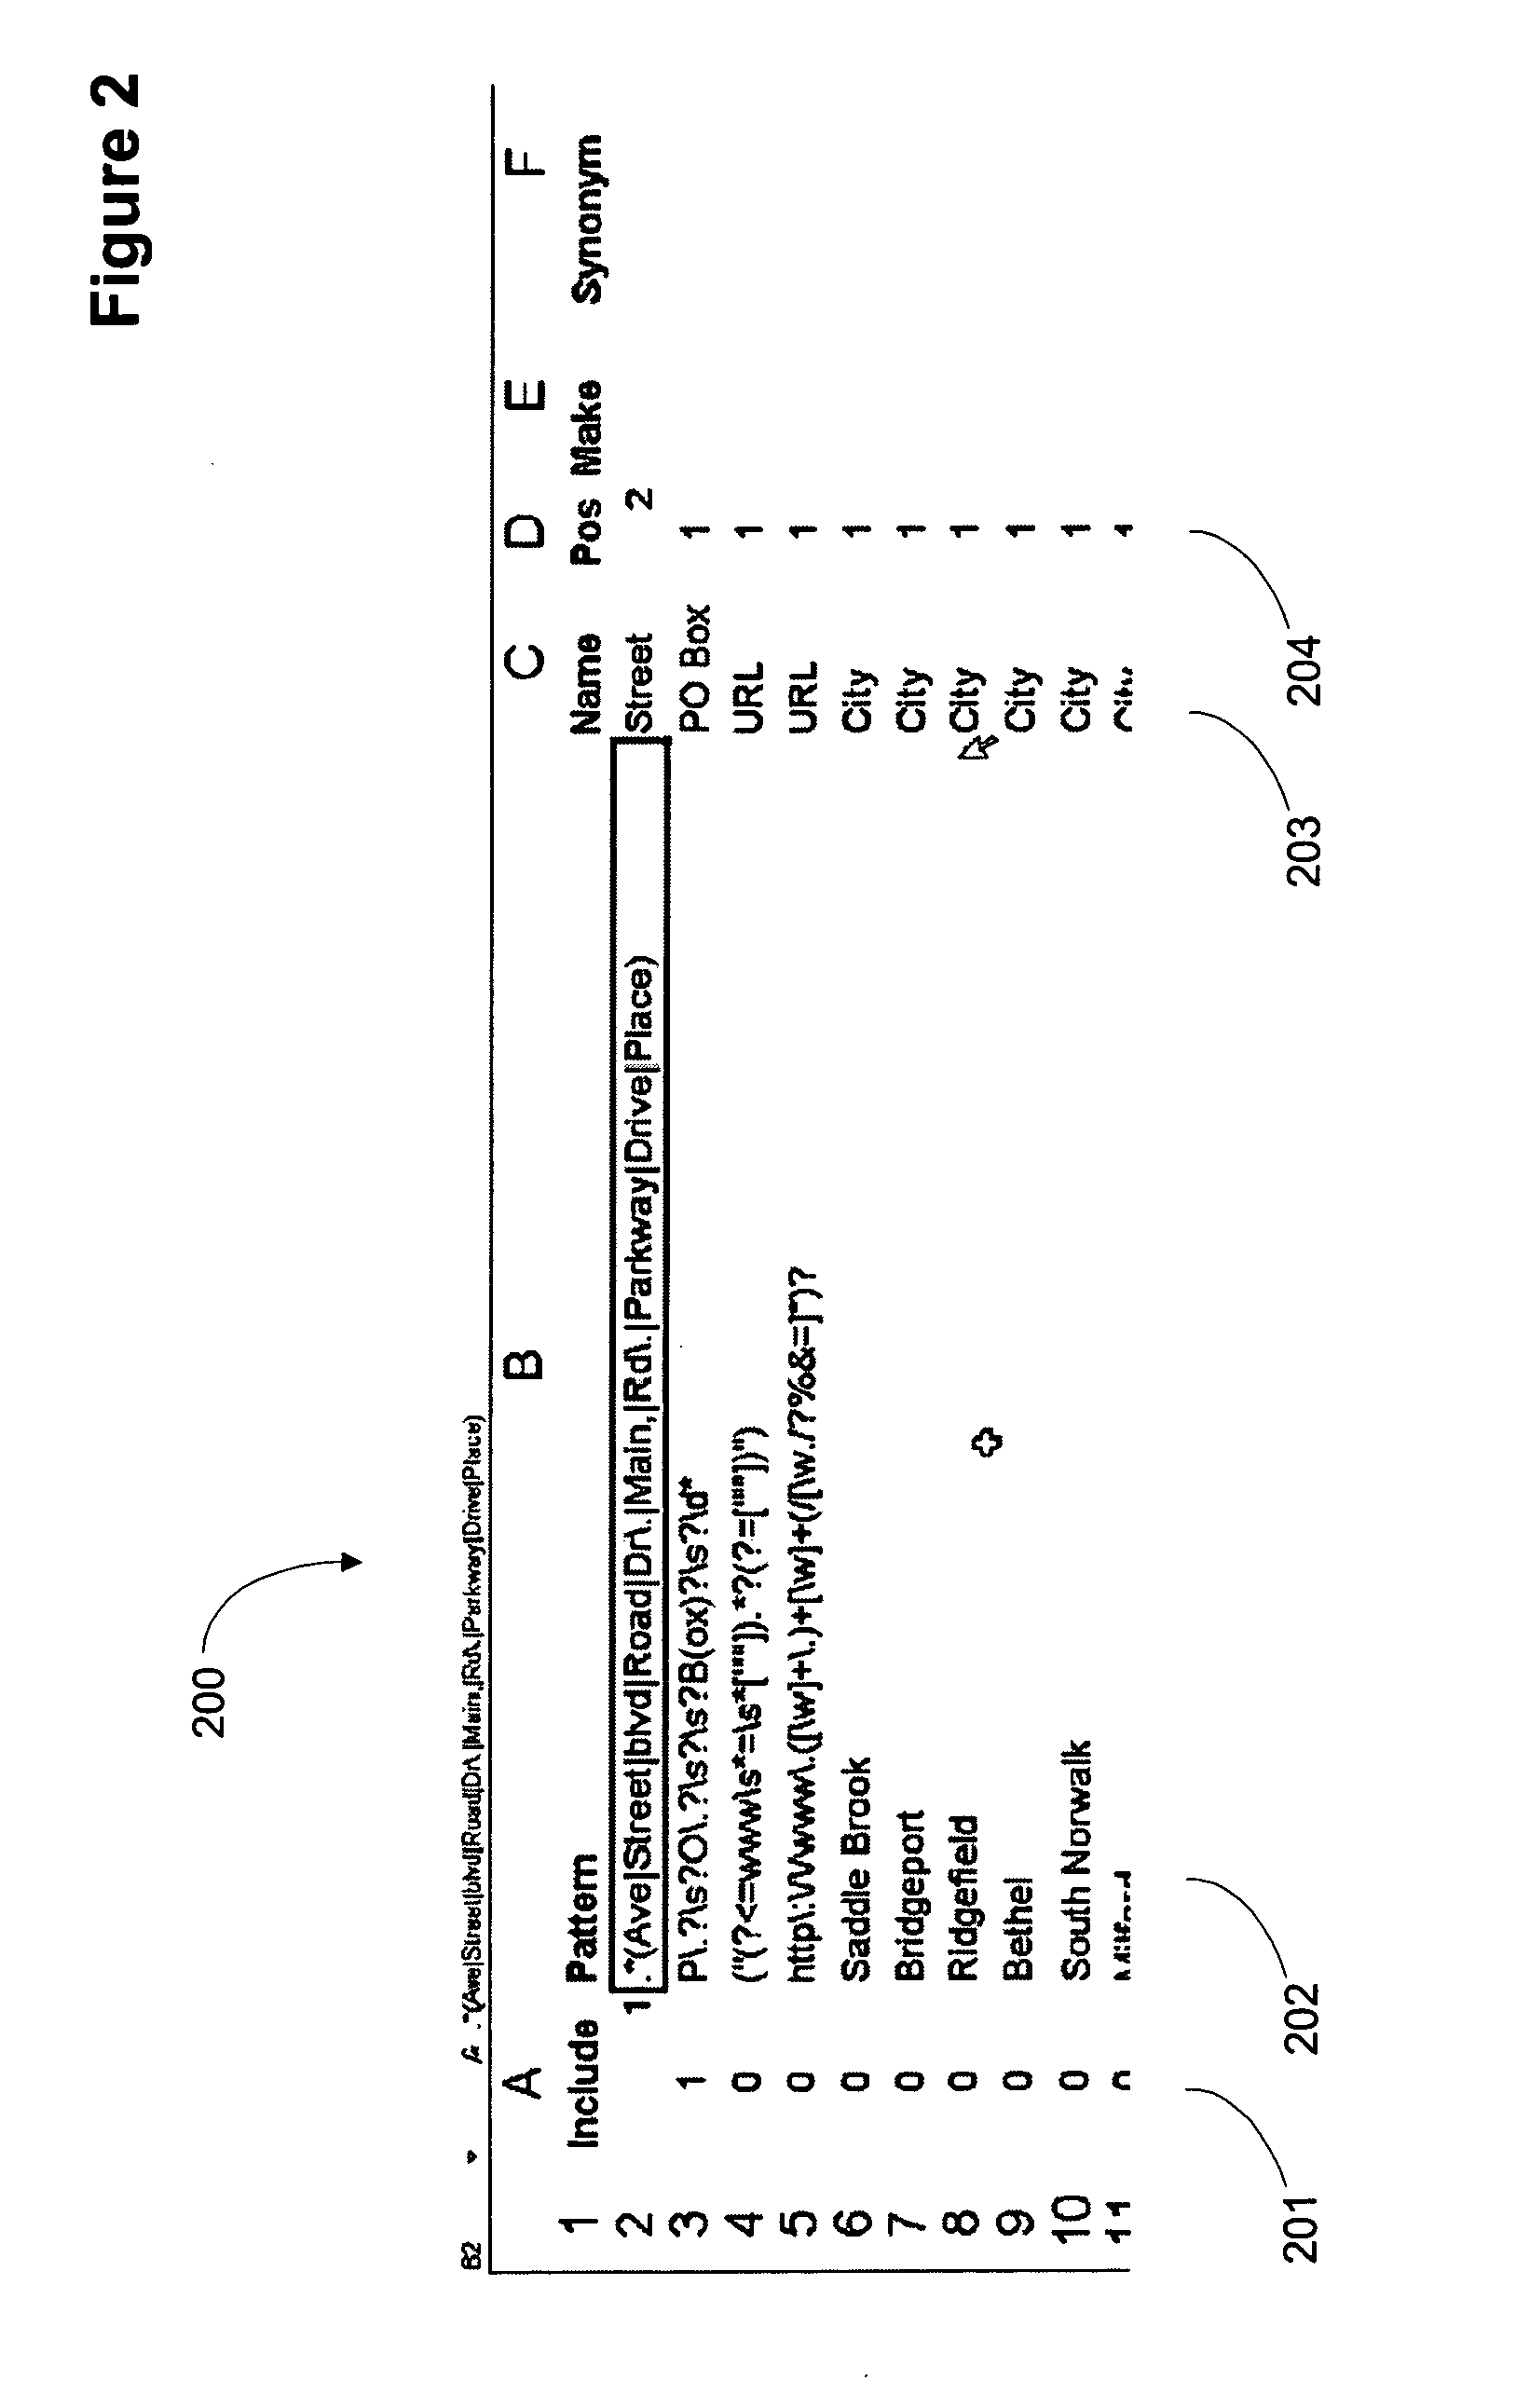 Apparatus and method for parsing unstructured data